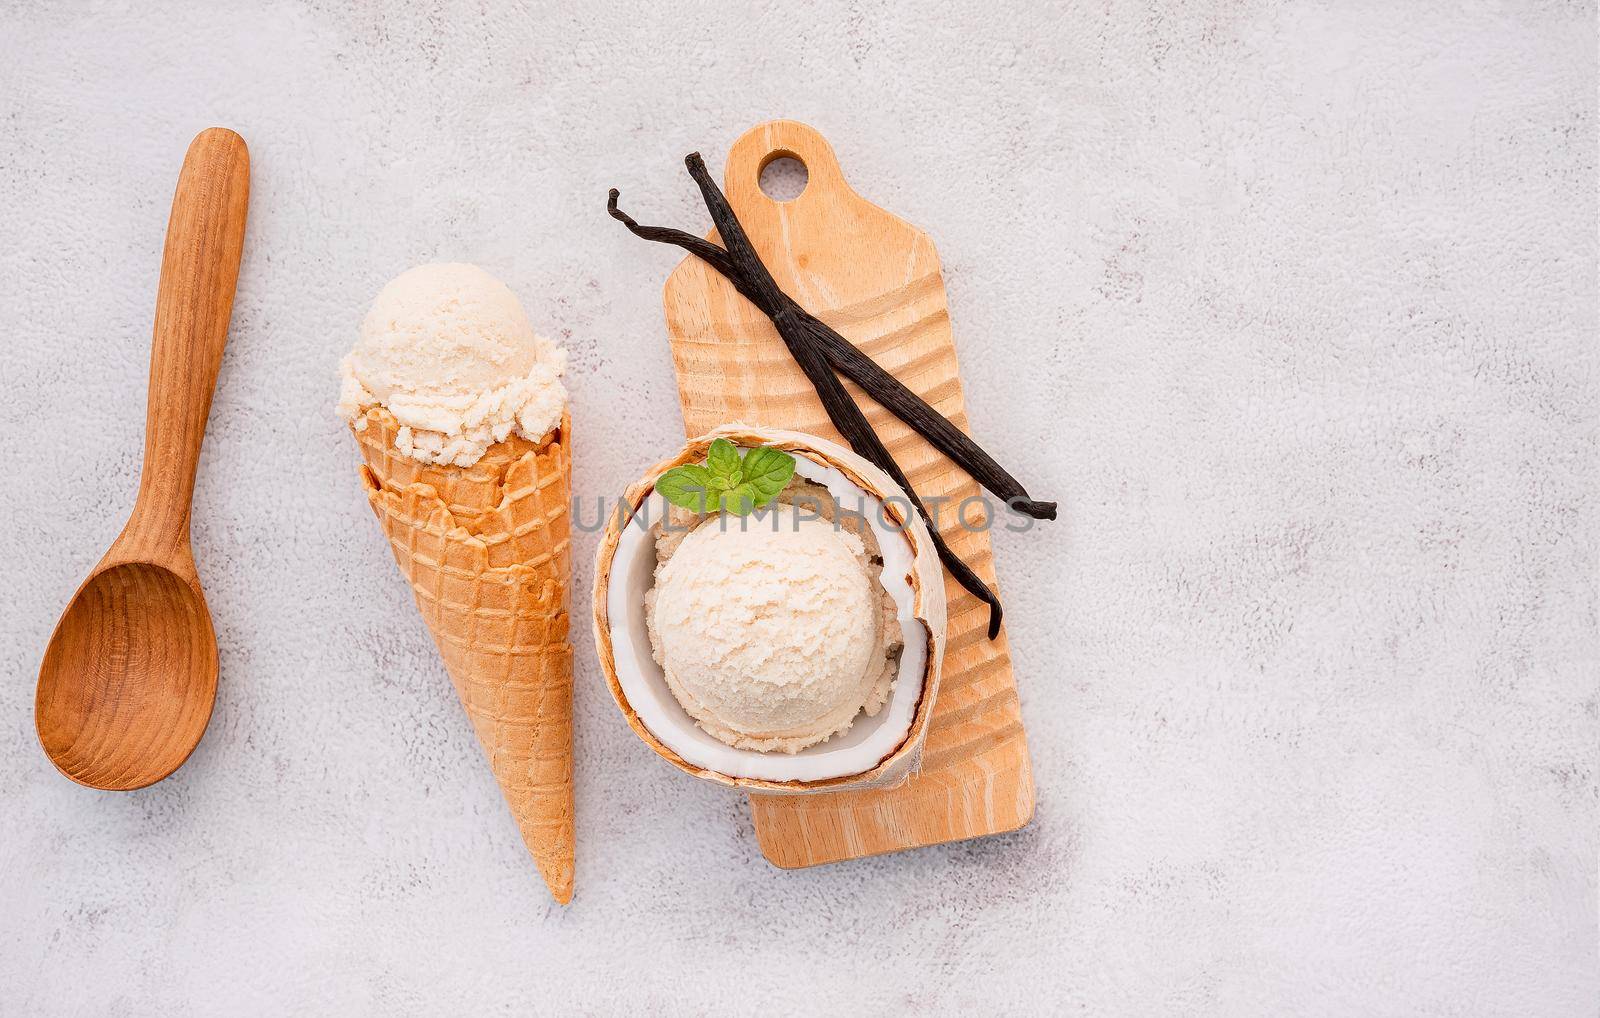 Coconut ice cream flavours in half of coconut setup on white stone background. Summer and Sweet menu concept. by kerdkanno